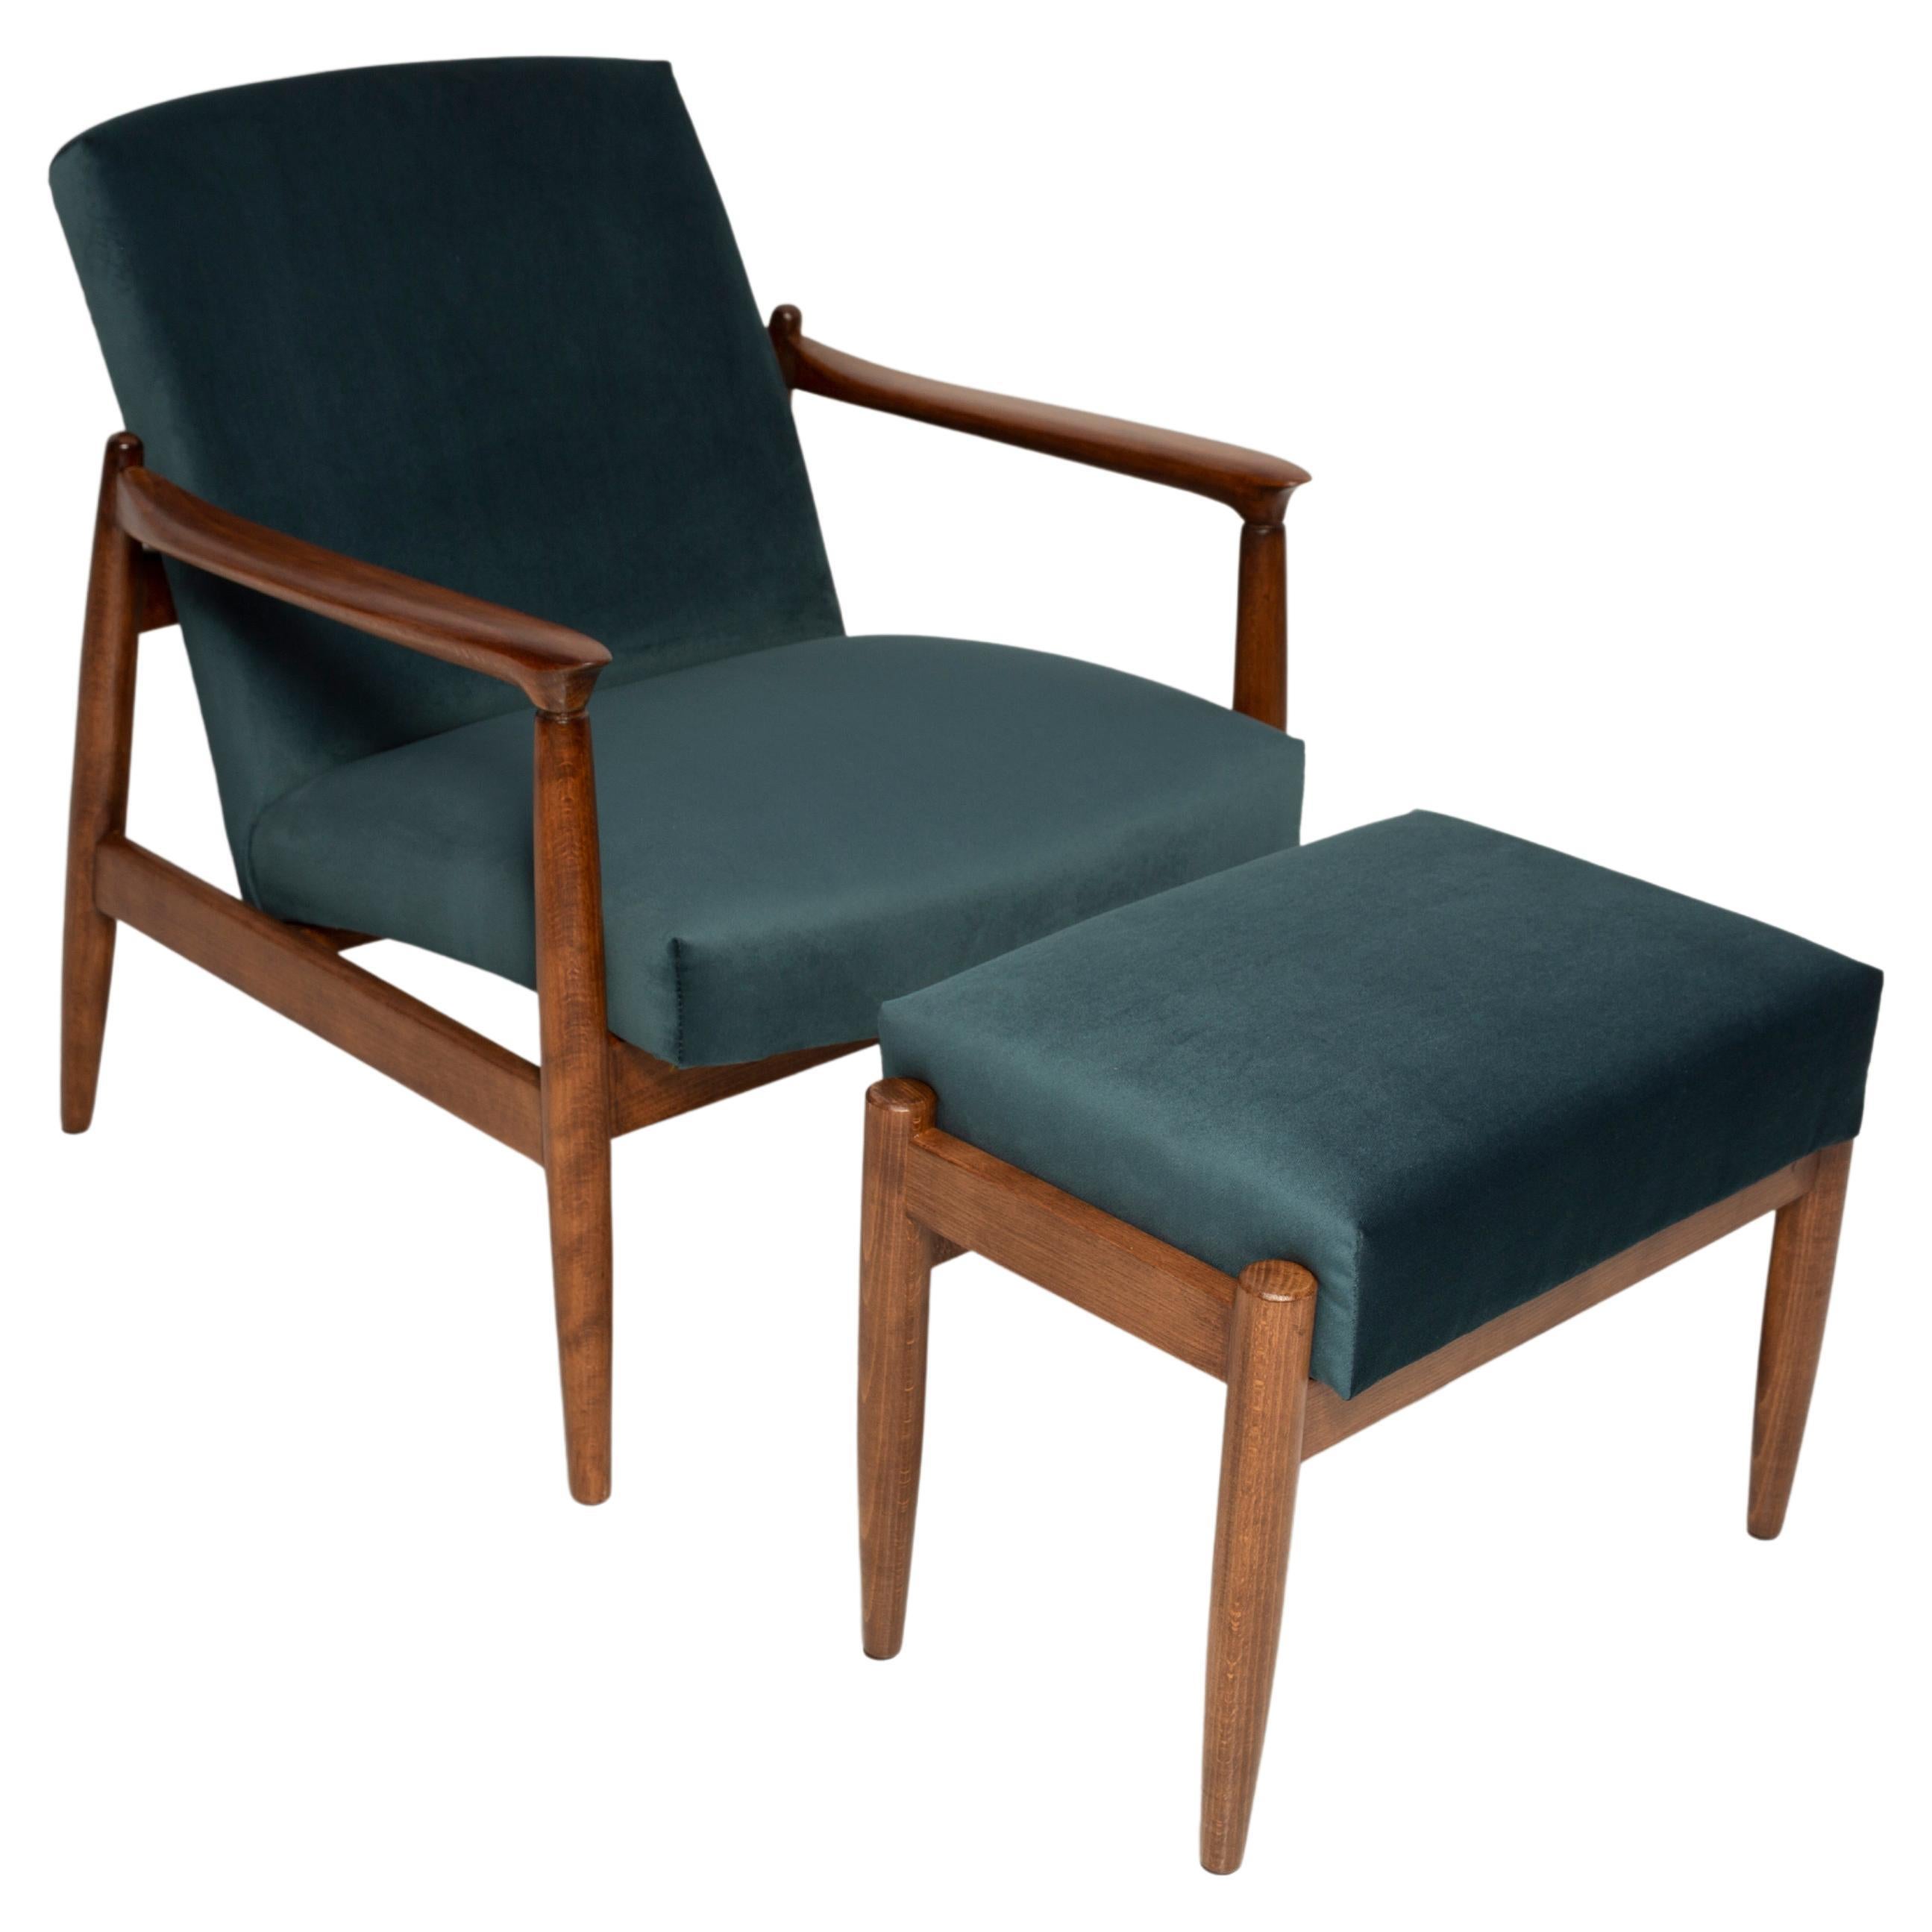 Set of Petrol Blue Vintage Armchair and Stool, Edmund Homa, 1960s For Sale